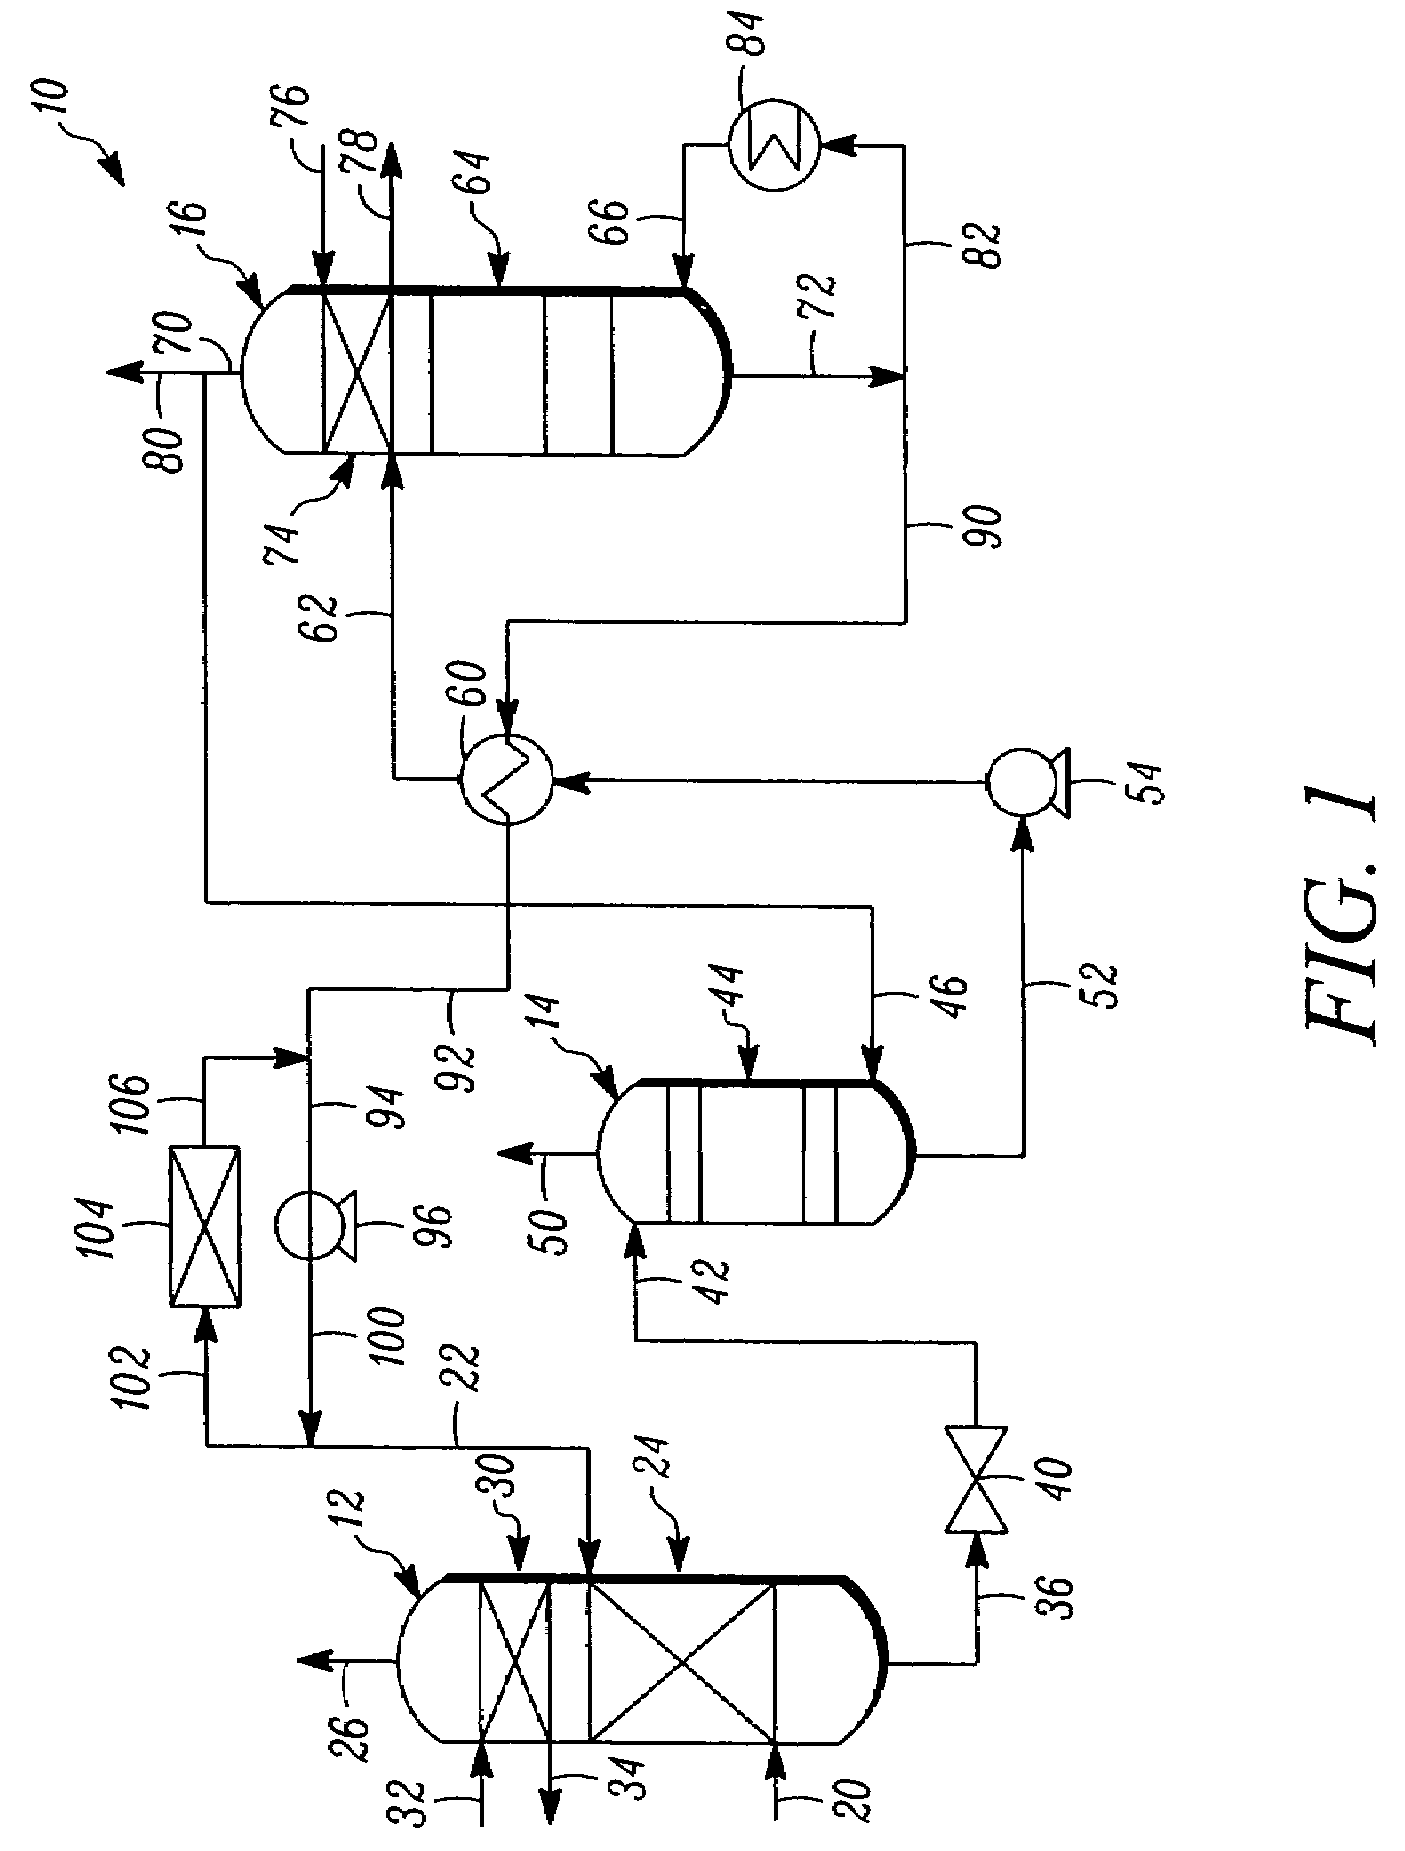 Absorption recovery processing of light olefins free of carbon dioxide